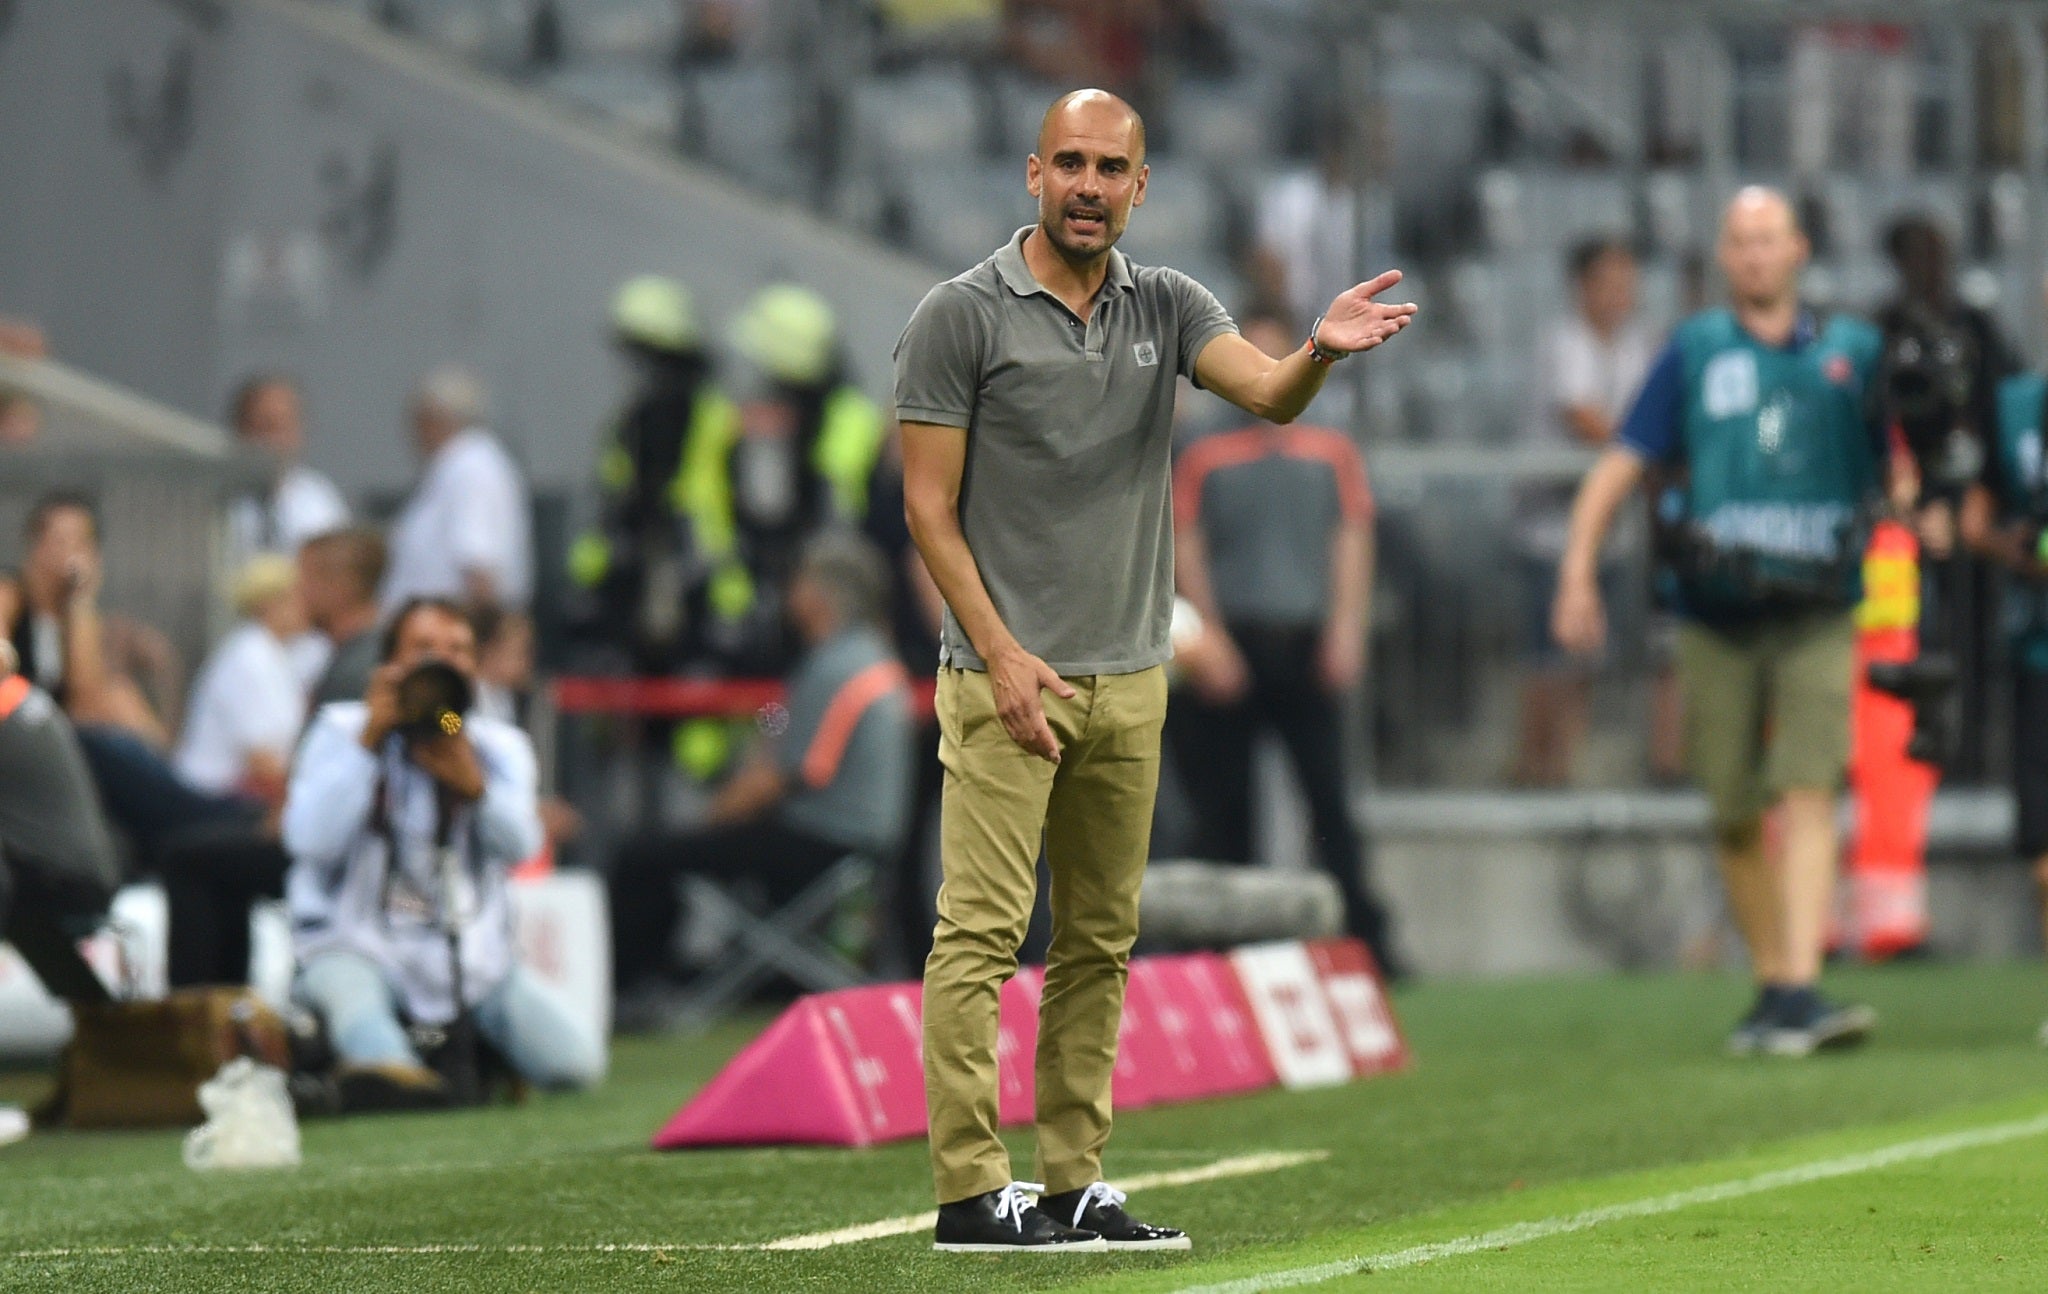 Pep Guardiola gestures from the sideline during Manchester City's pre-season friendly with Bayern Munich